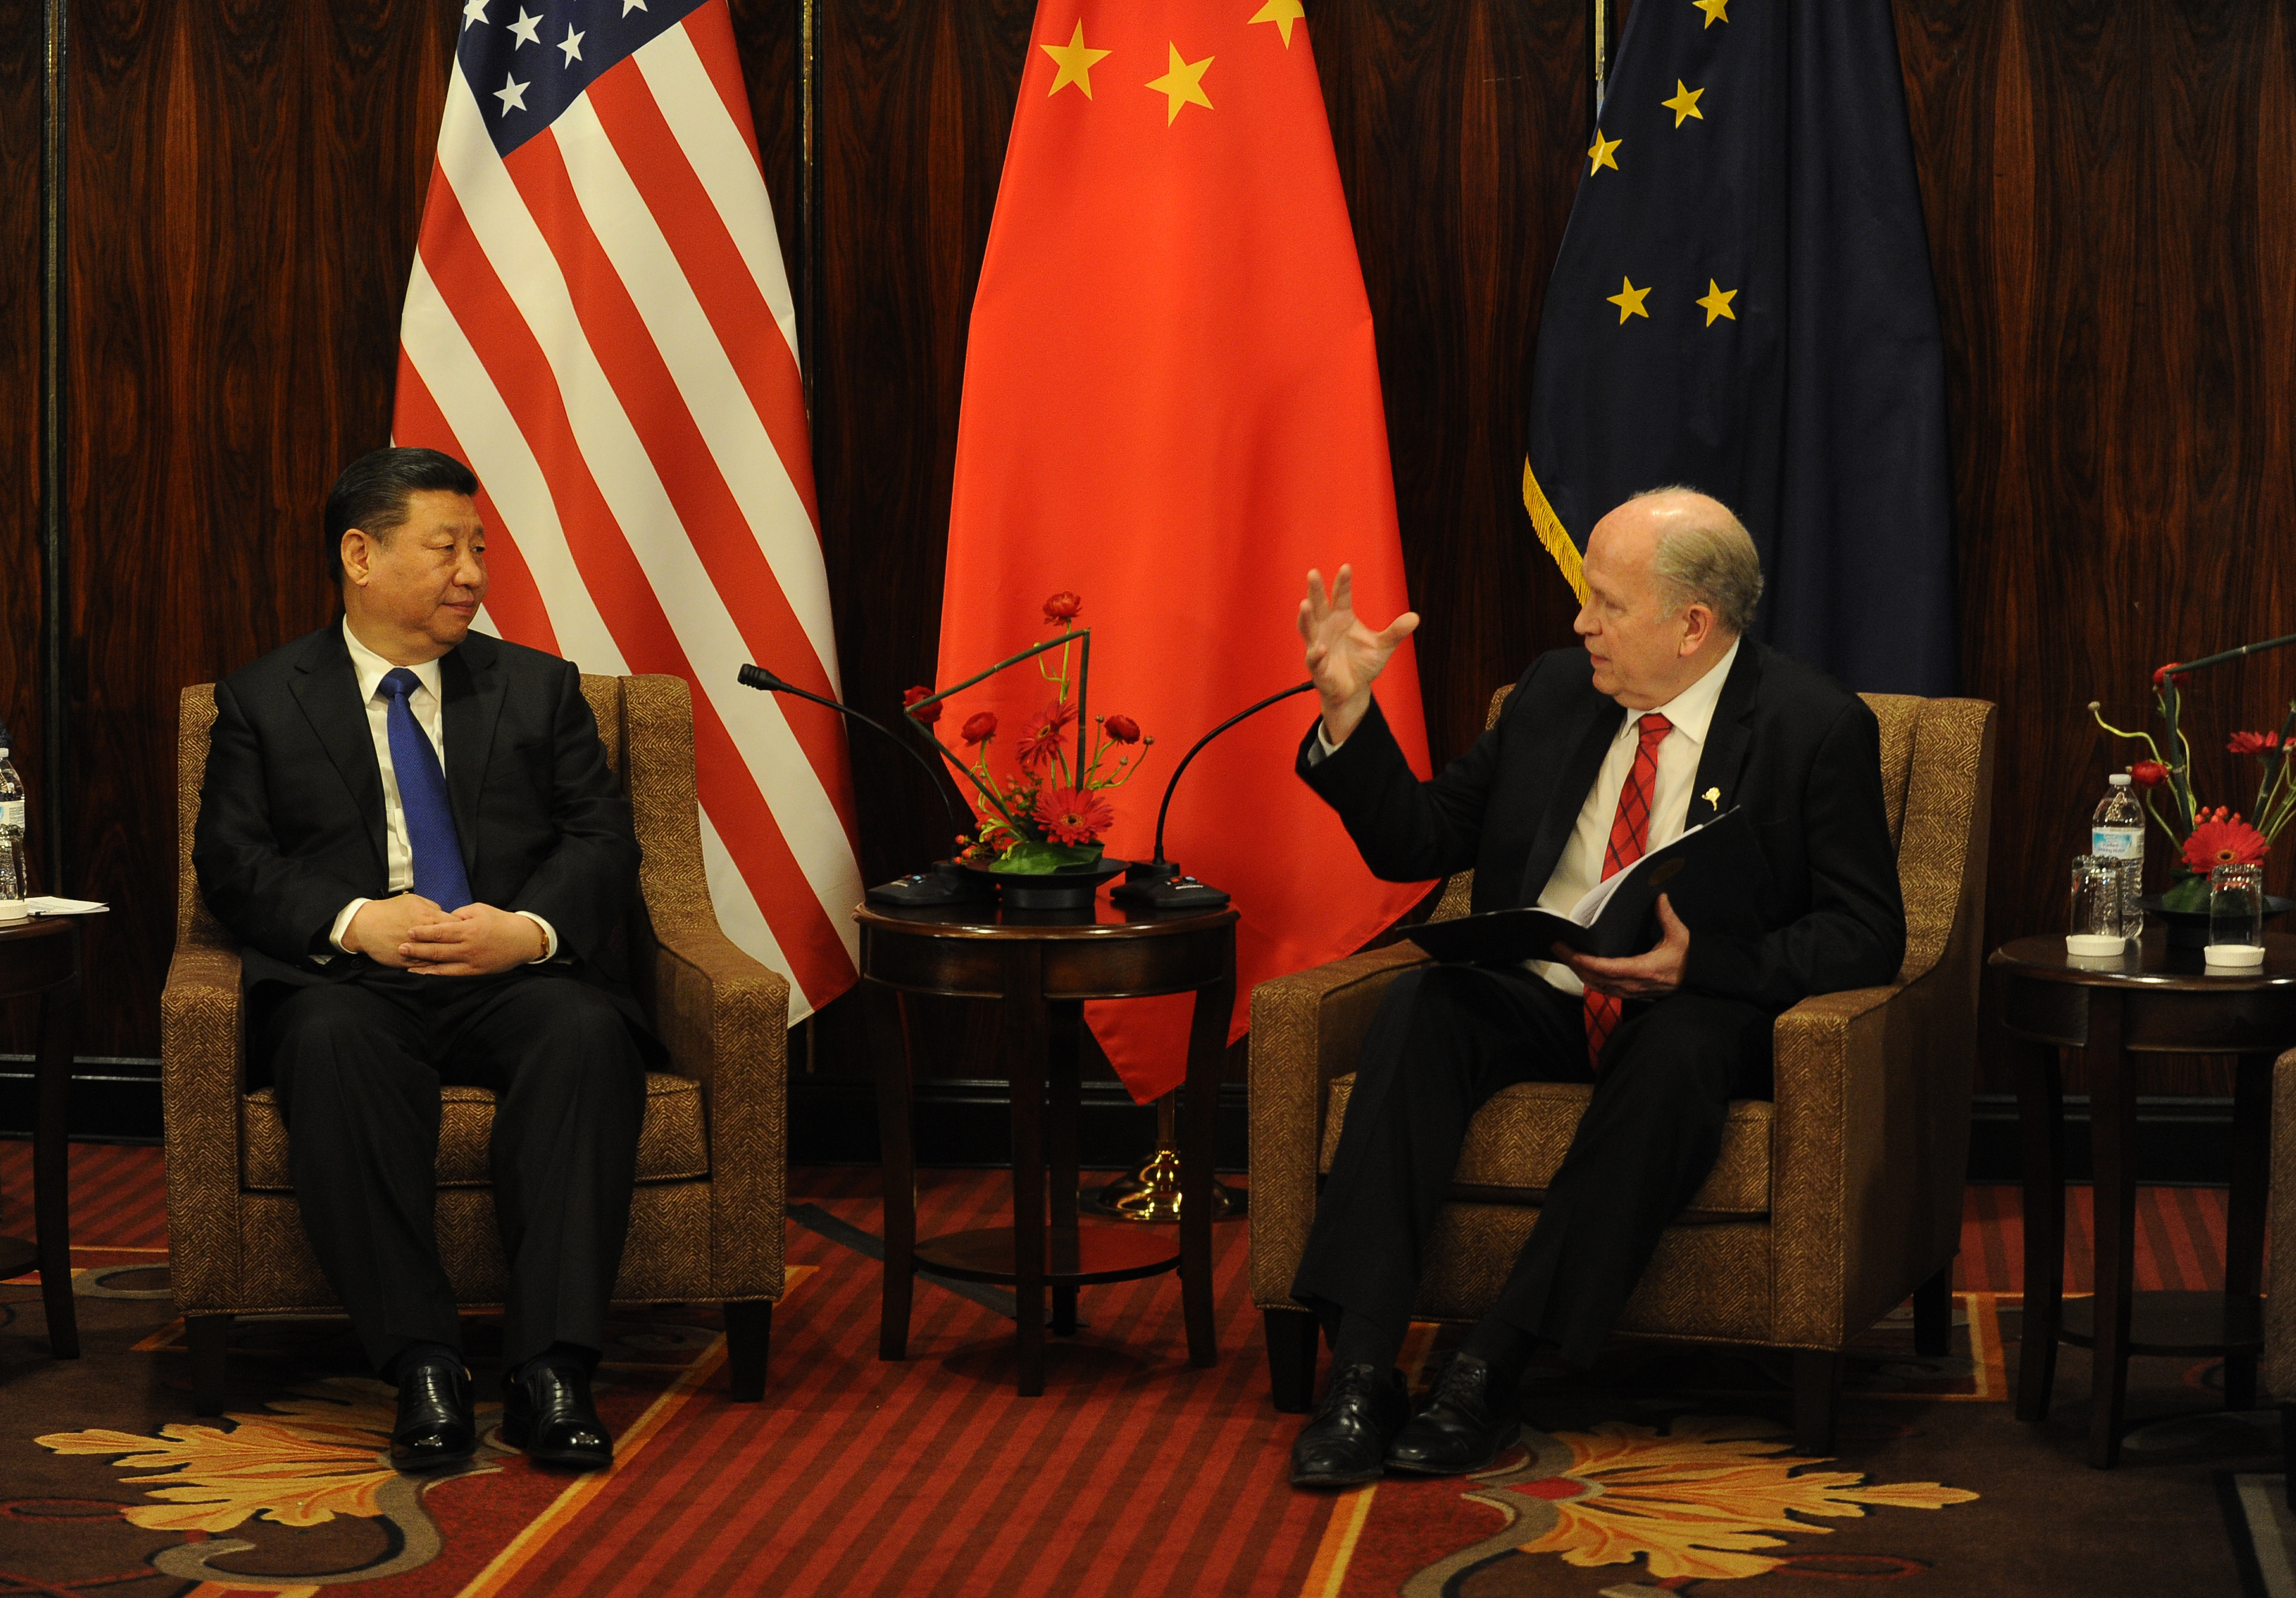 Xi Jinping, President of China and Alaska Governor Bill Walker meet at the Hotel Captain Cook on Friday, April 7, 2017. The president of China stopped over in Anchorage after meeting with President Trump at Mar-a-Lago. (Bob Hallinen / Alaska Dispatch News)